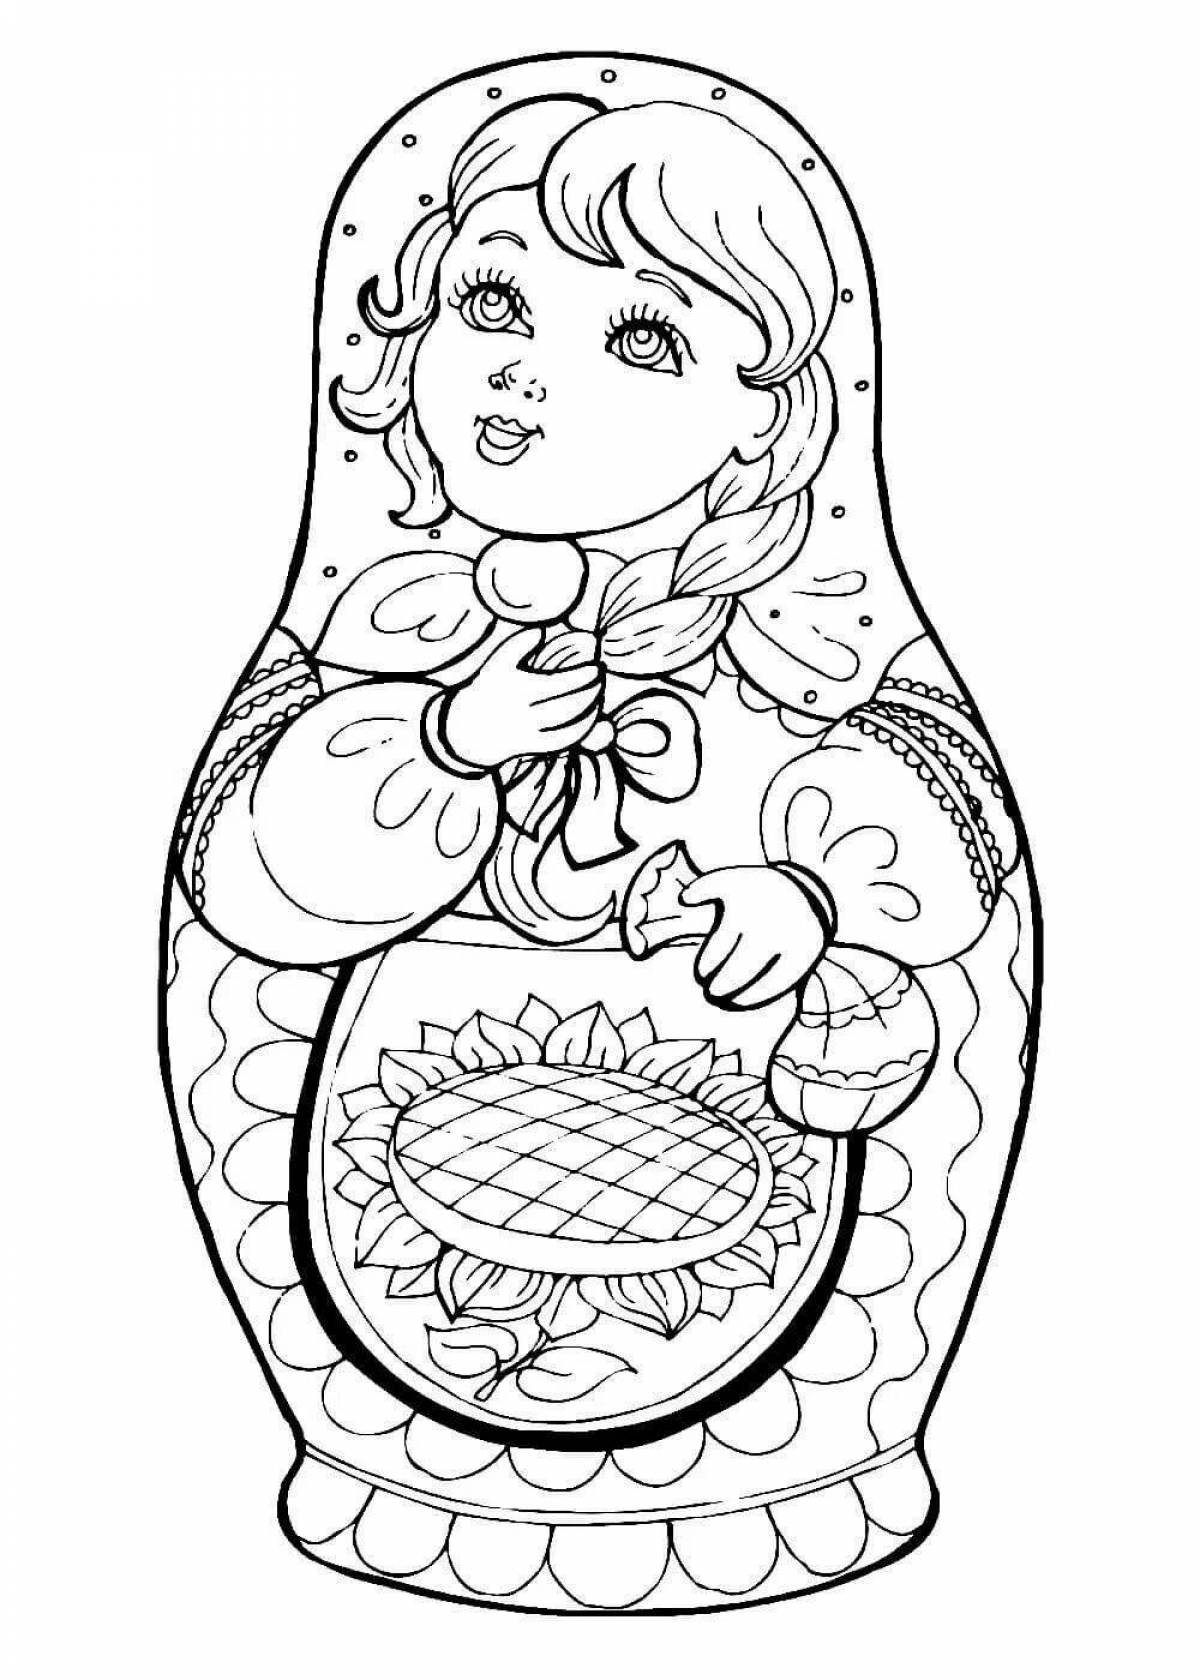 Fancy Russian matryoshka coloring book for 6-7 year olds